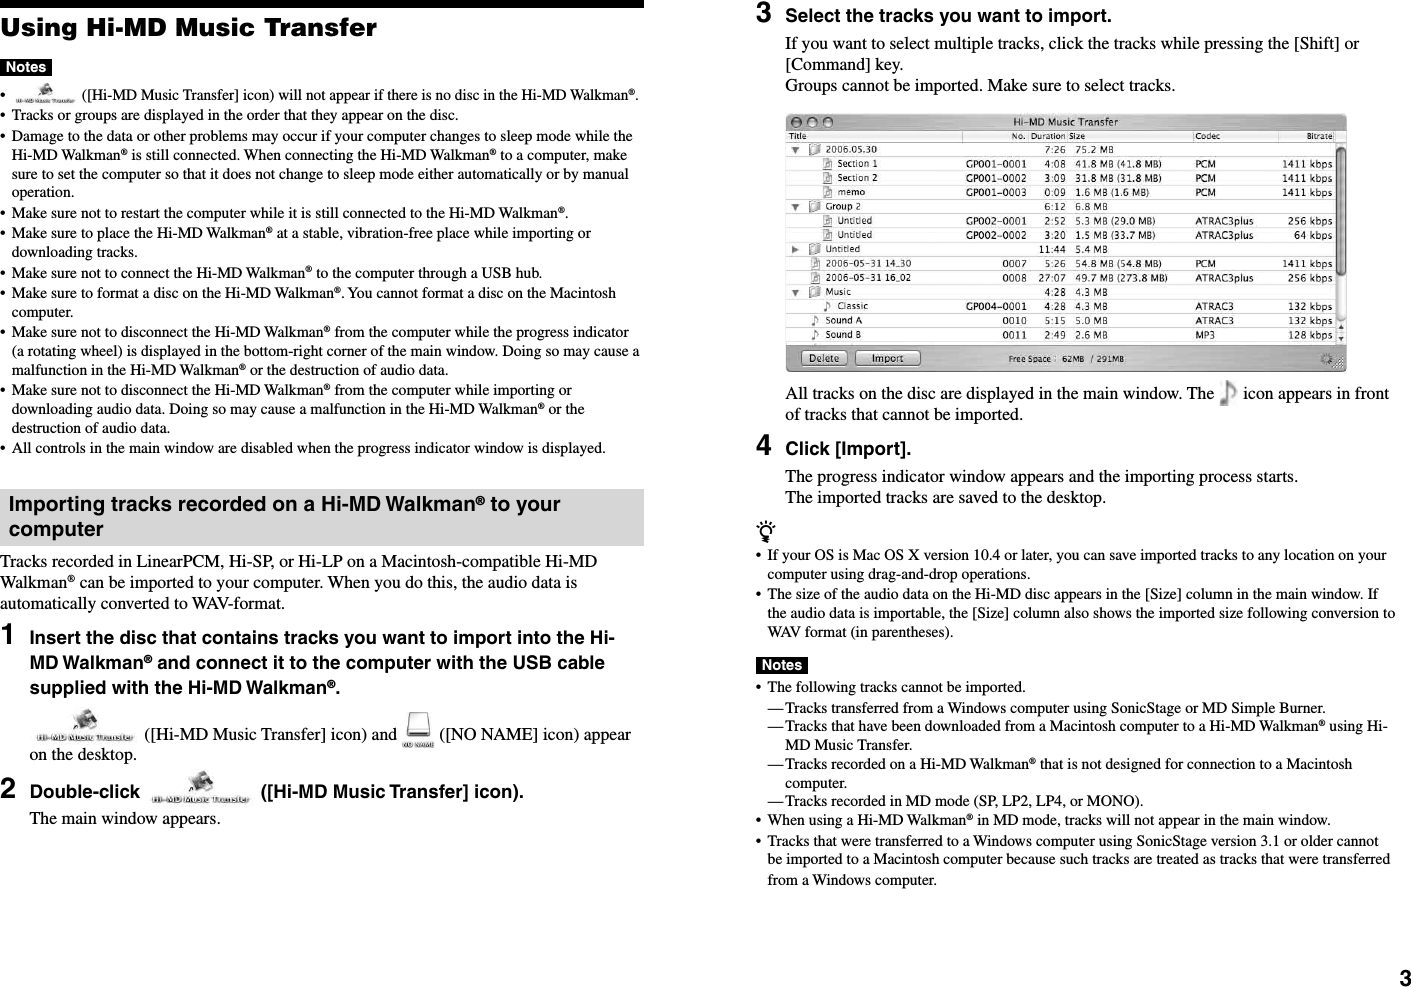 Page 3 of 6 - Sony MZ-M100 Hi-MD Music Transfer For Mac Ver. 2.0 Version 2 (User Manual) Hi MD2 Manual